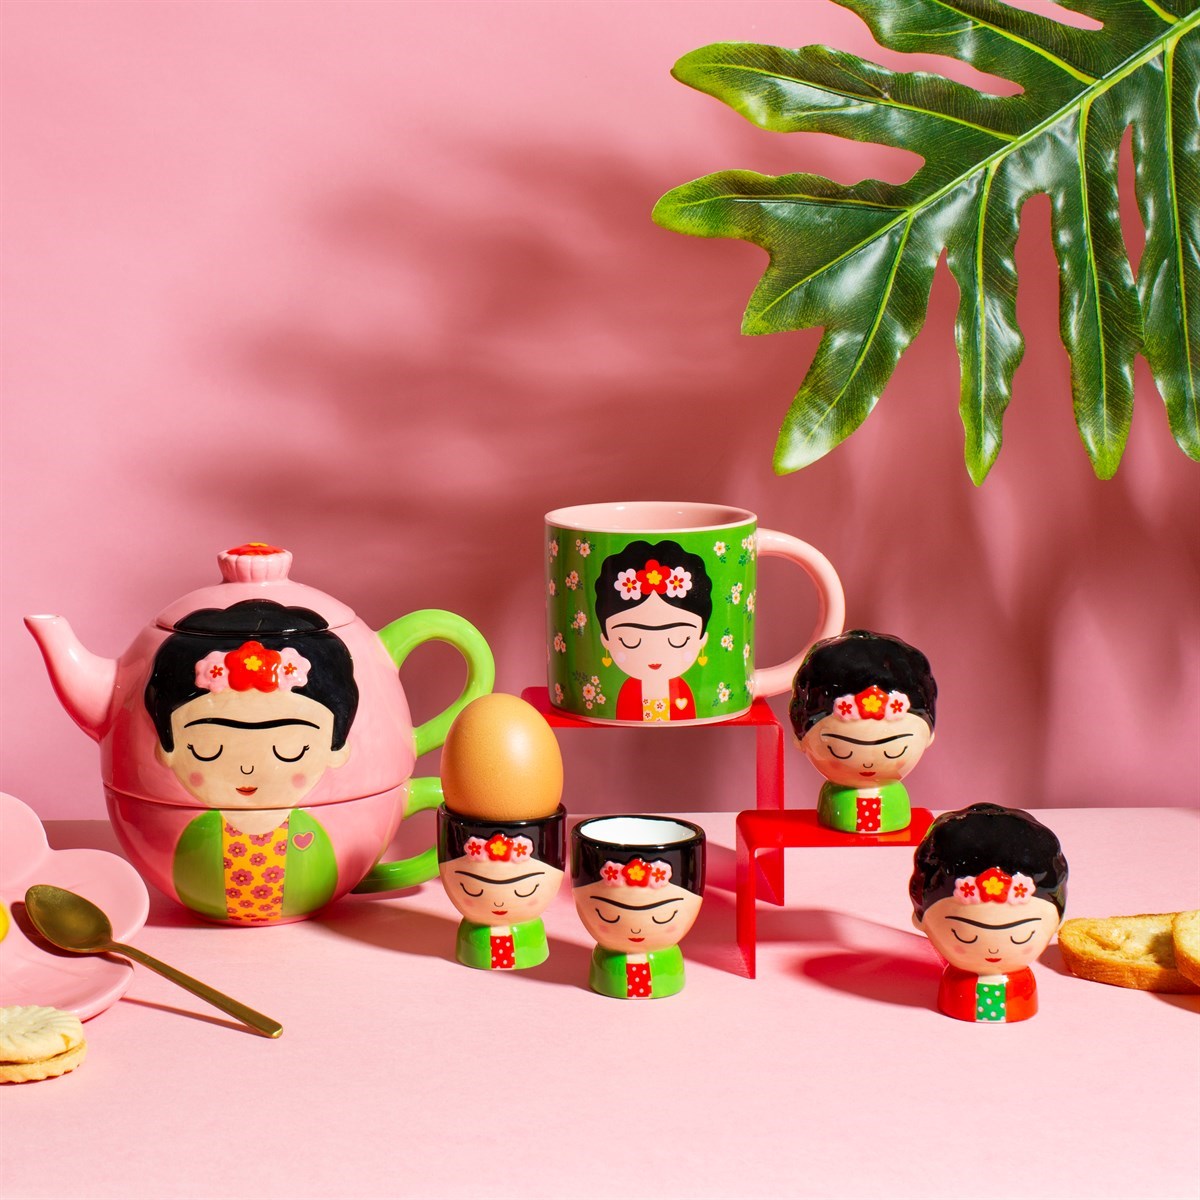 Frida Kahlo Salt and Pepper Shakers kitchen range from Sass and Belle